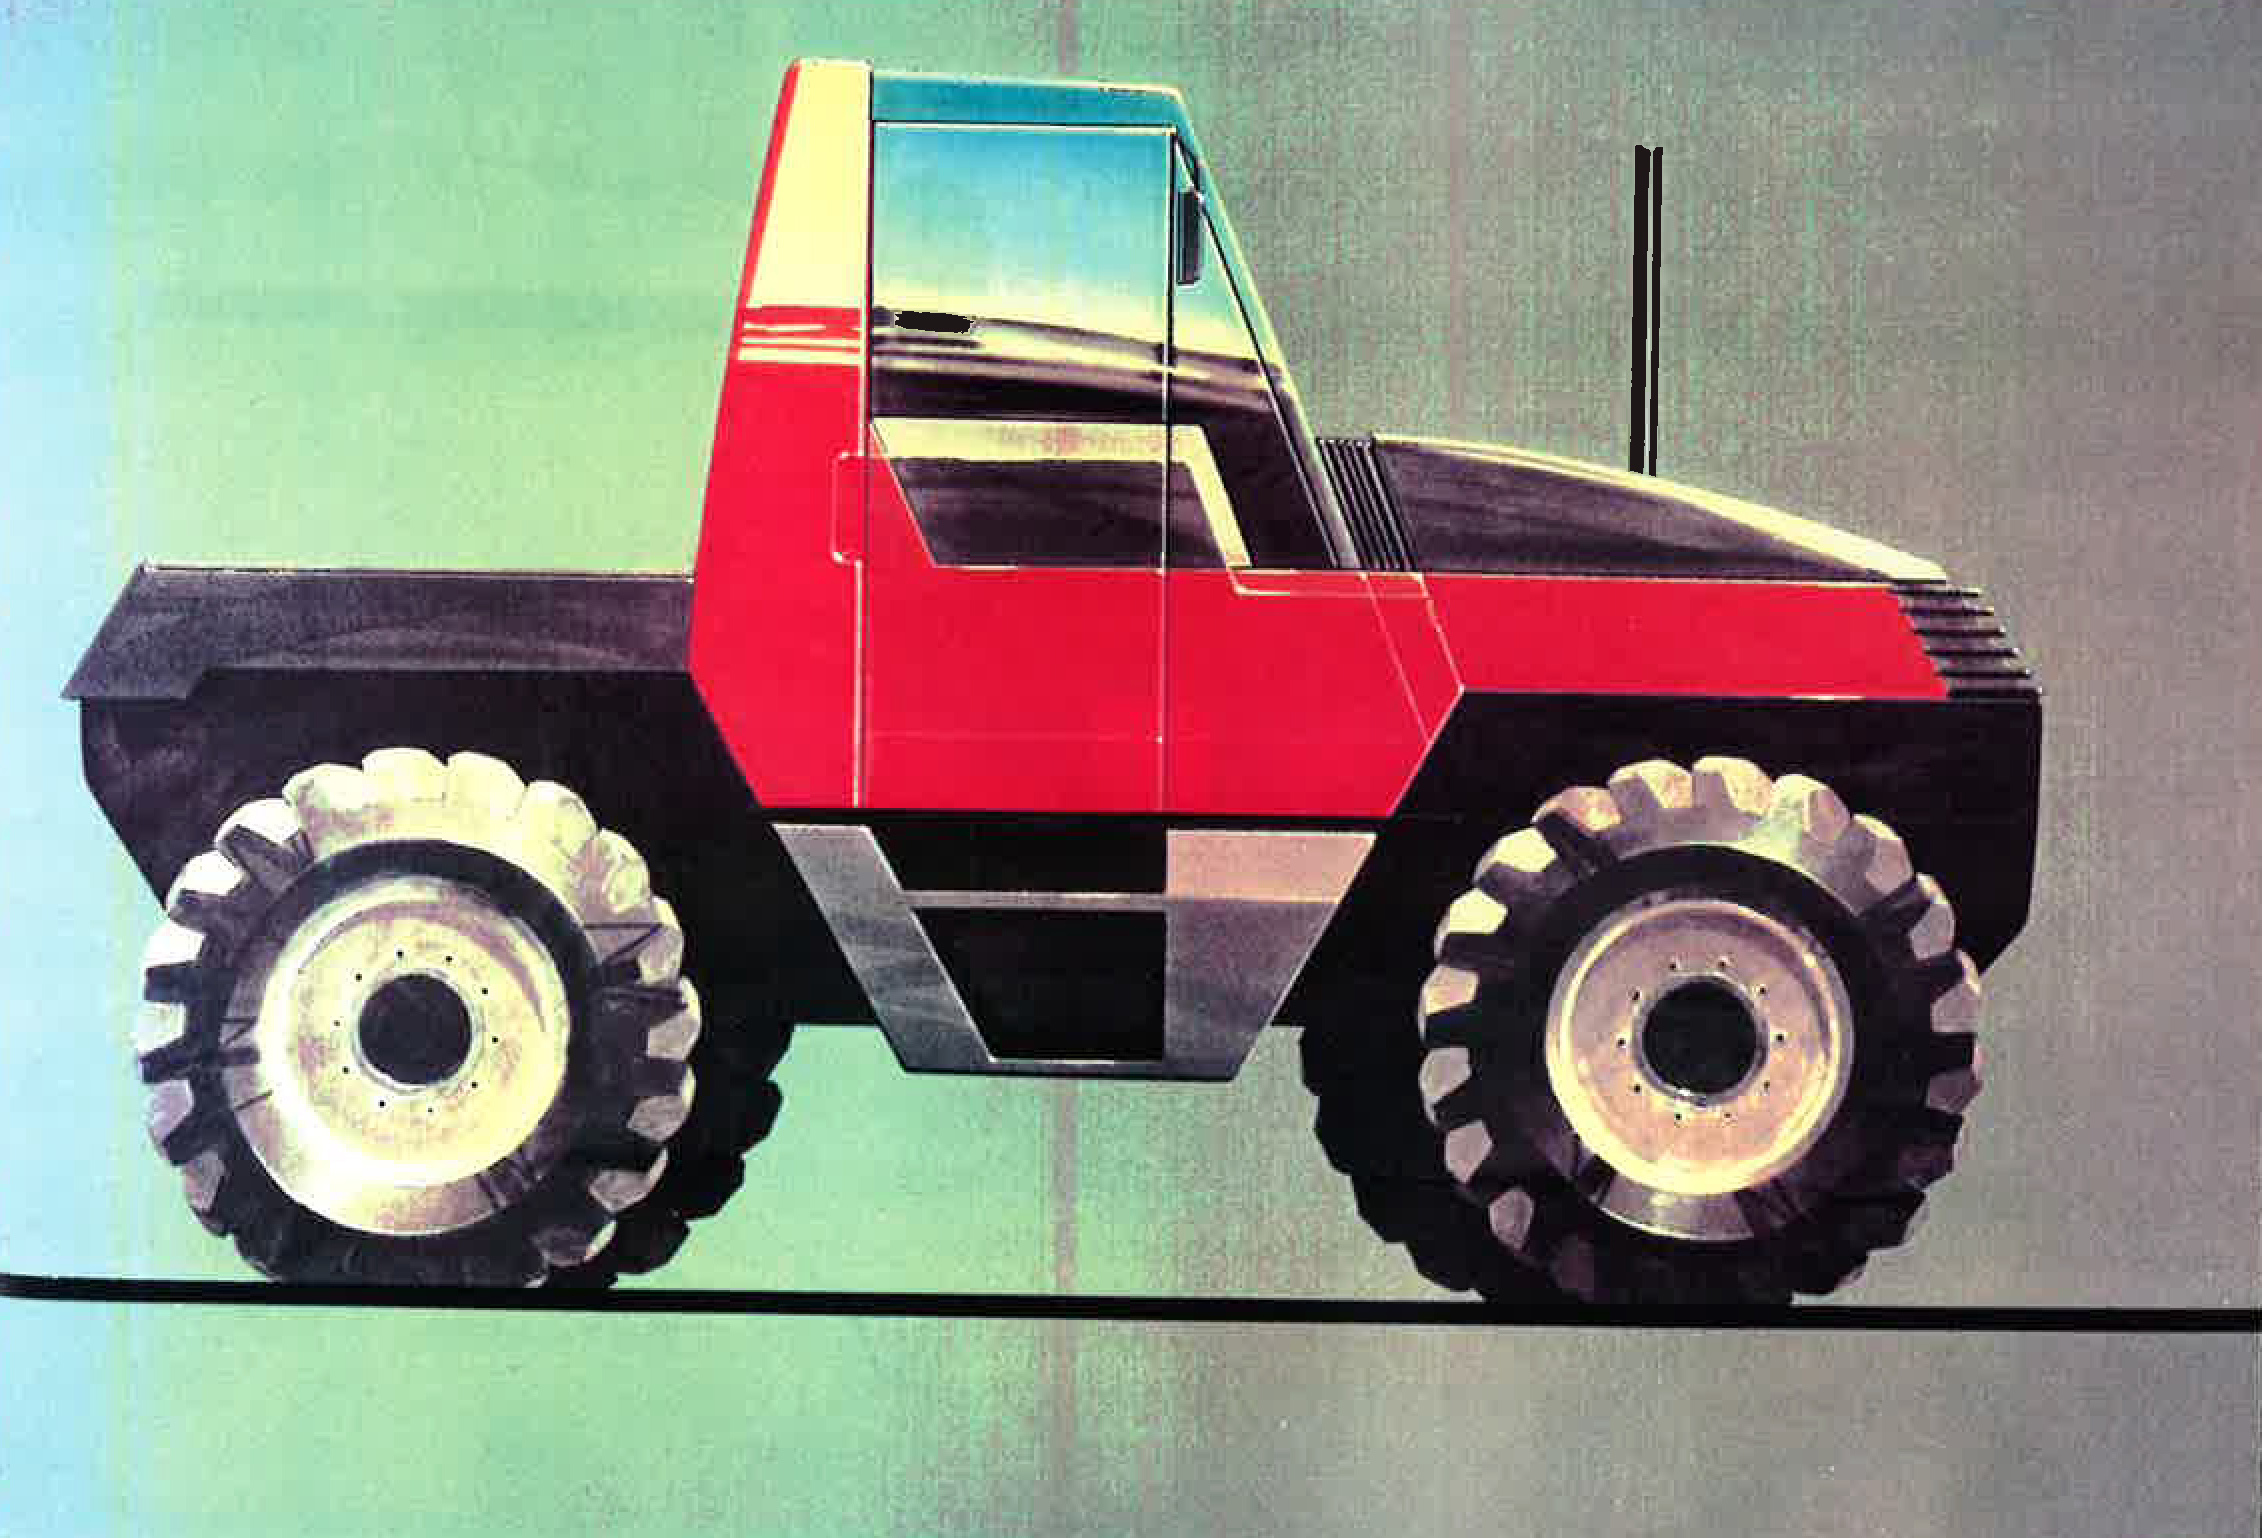 1986 - one of the first styling sketches done five years before Fastrac was launched